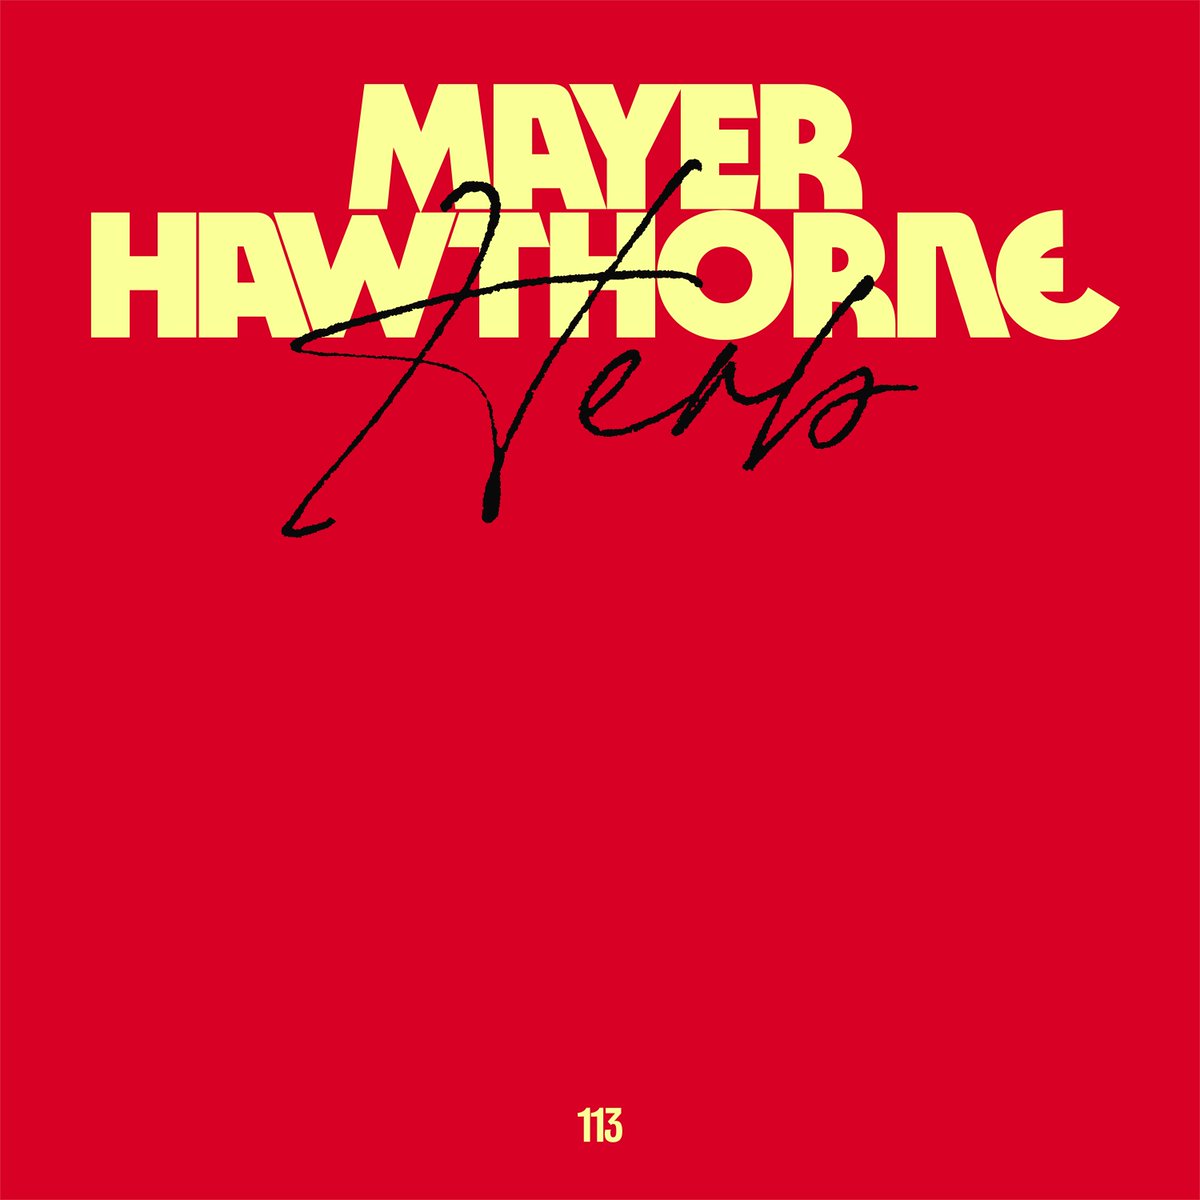 Herb Sundays 113: Mayer Hawthorne (@MayerHawthorne) The Ann Arbor-raised LA crooner keeps it mellow with bulletproof jazz and soul cuts. Art by @Michaelcina. Link in bio to sub'stck, apple, spotify.